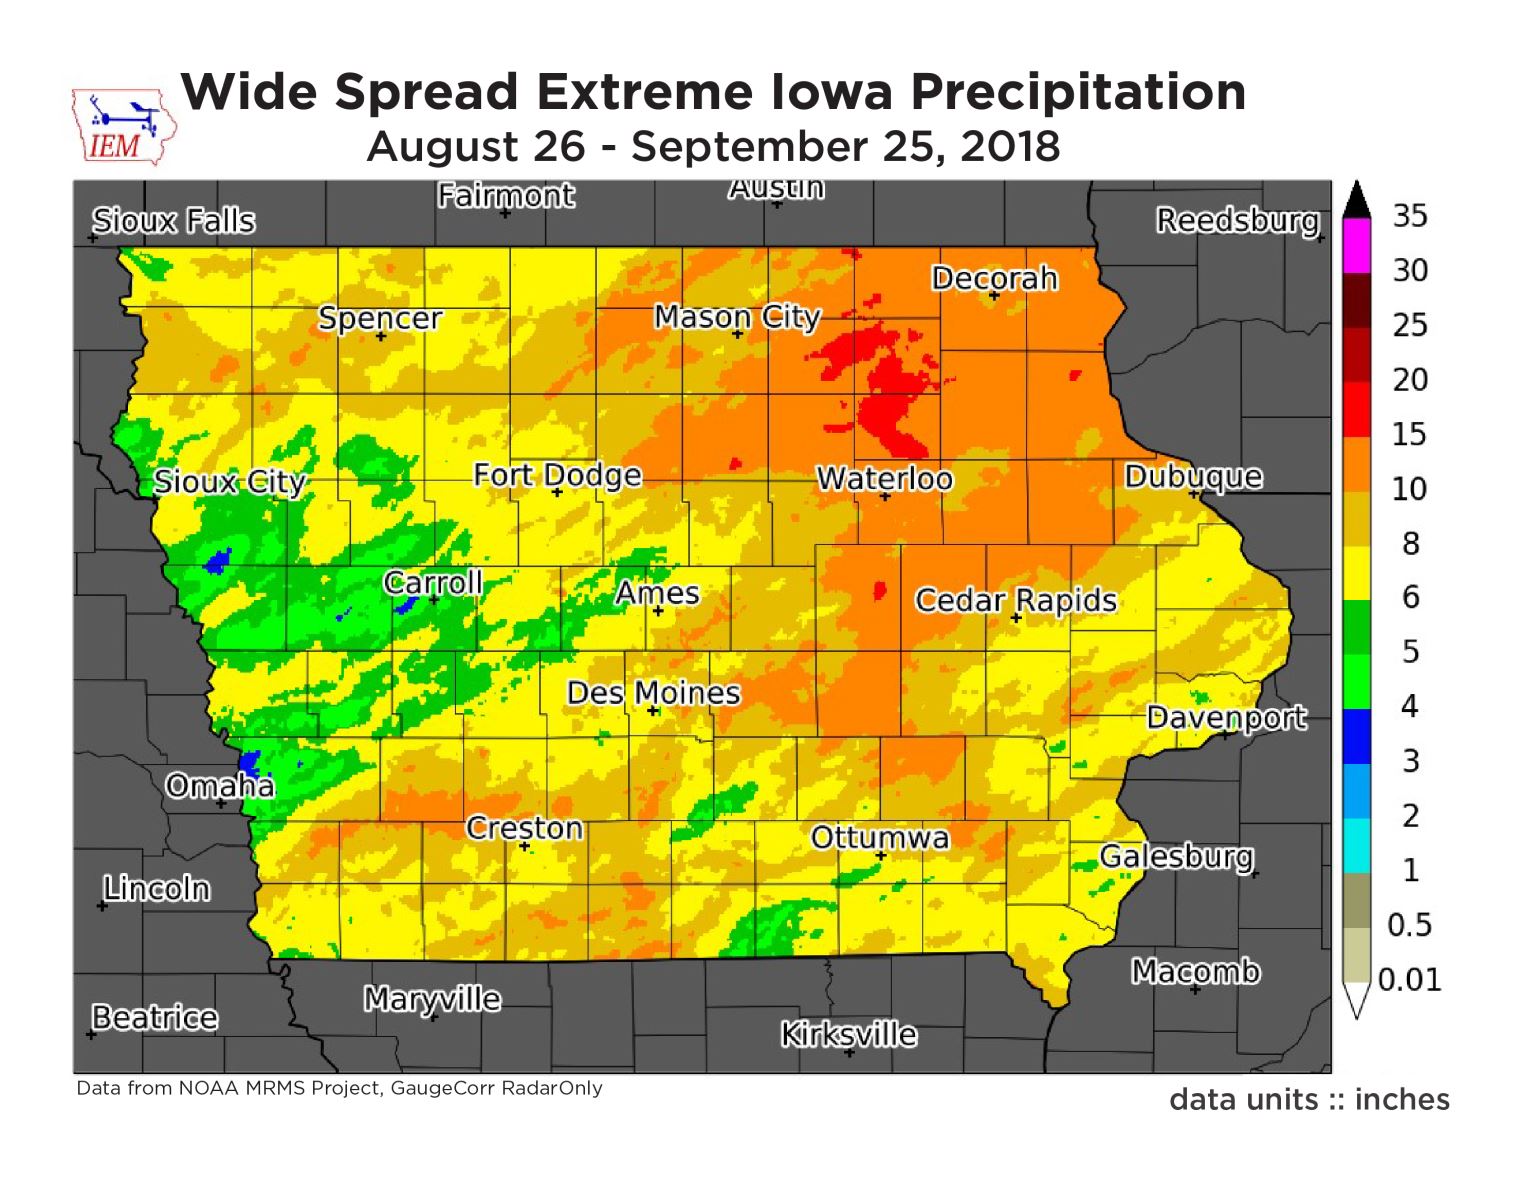 IEC joins call for planning and preparation as extreme weather intensifies in Iowa